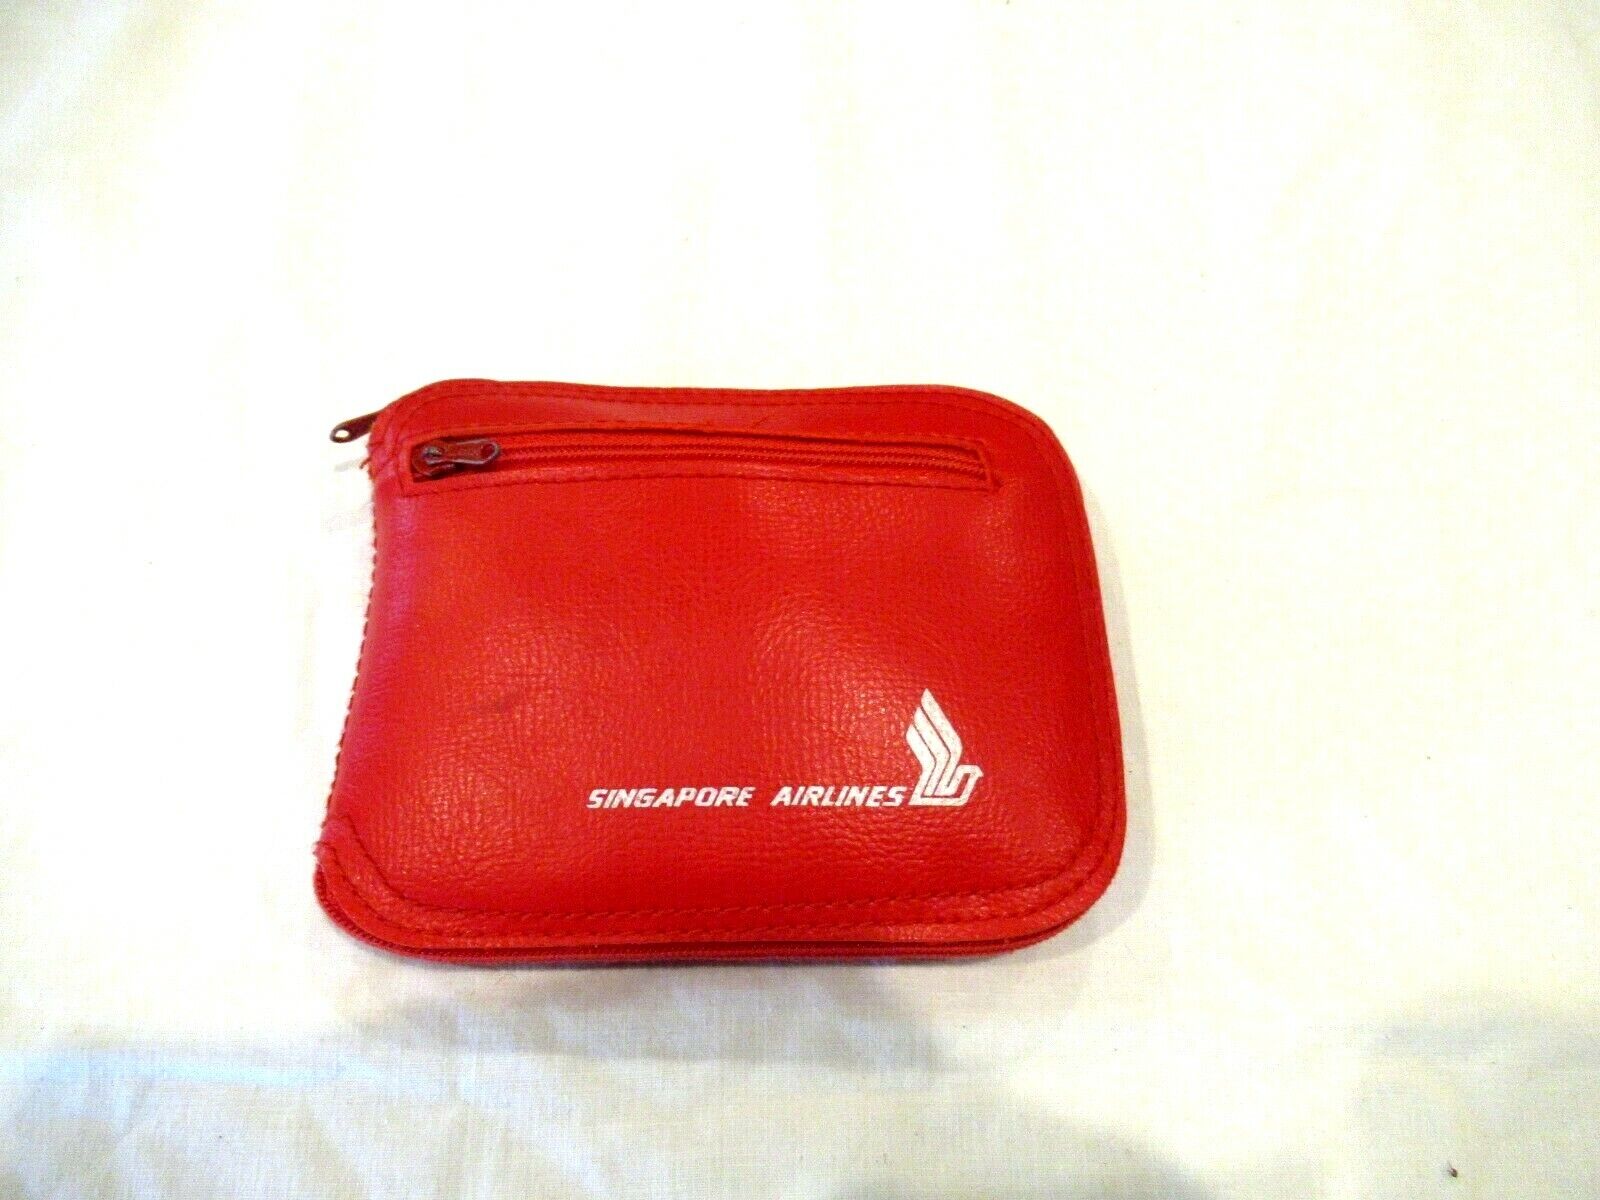 Singapore Airlines red tote bag, Biggest B747, advertising